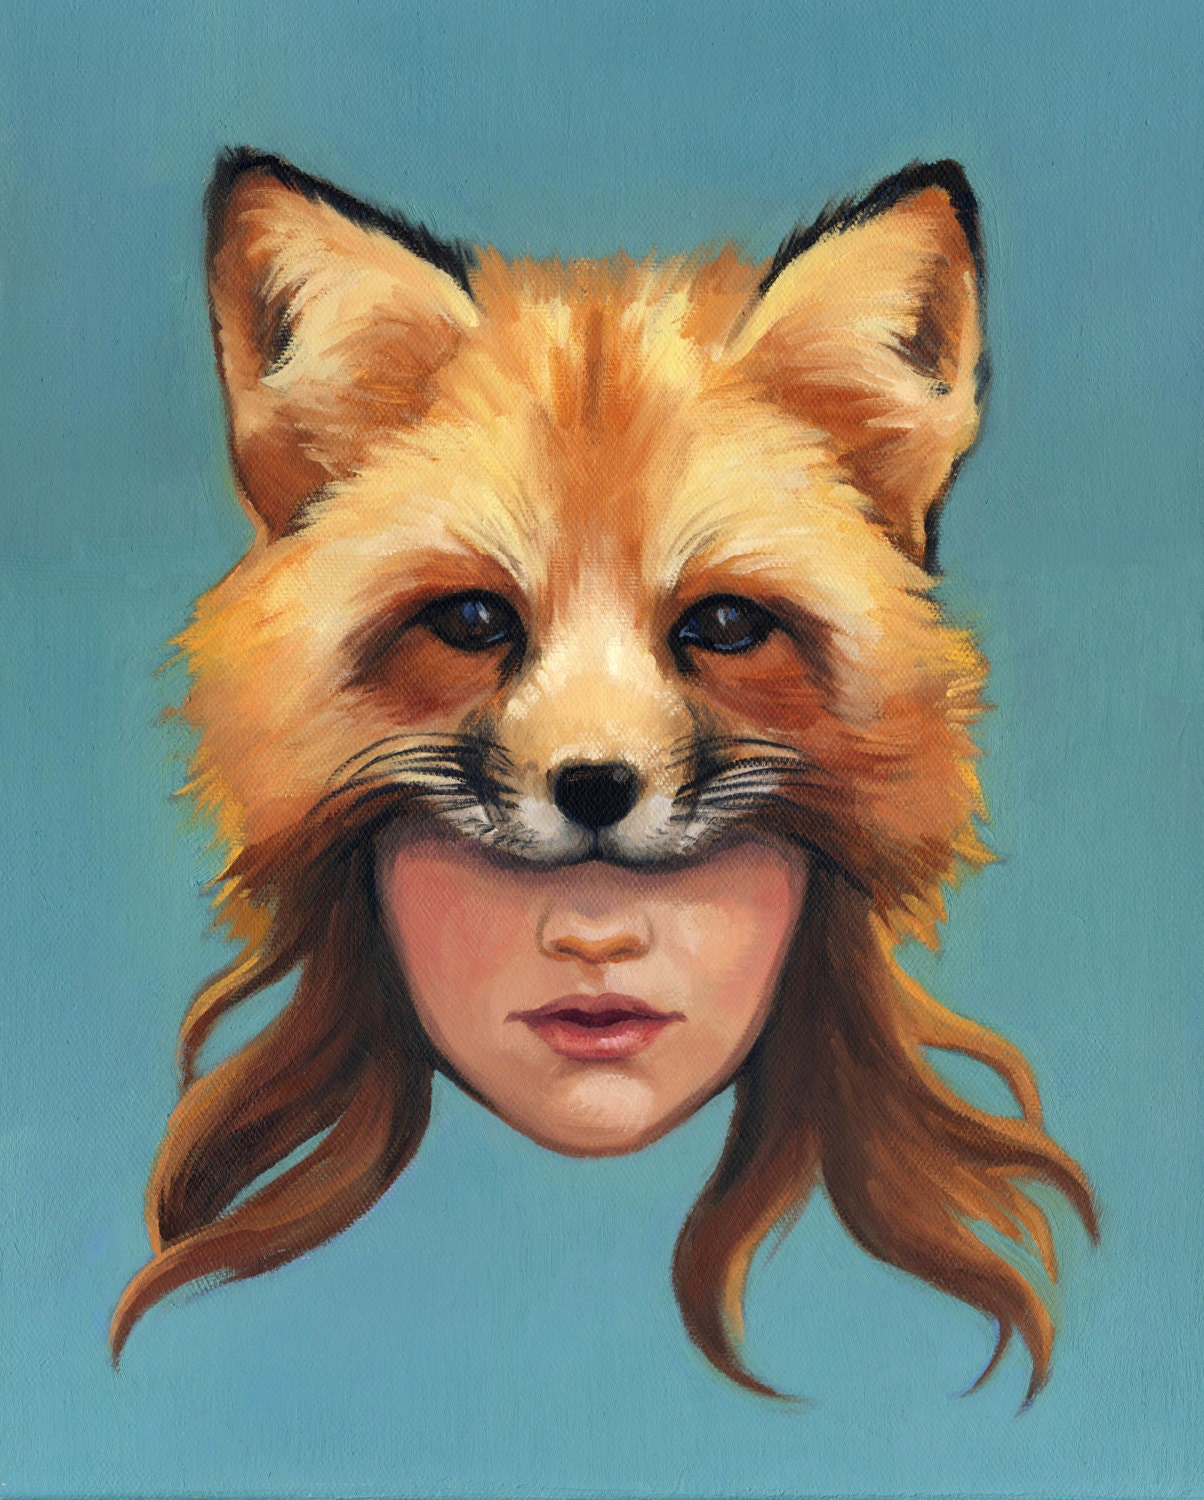 Girl In Fox Mask With Teal Background